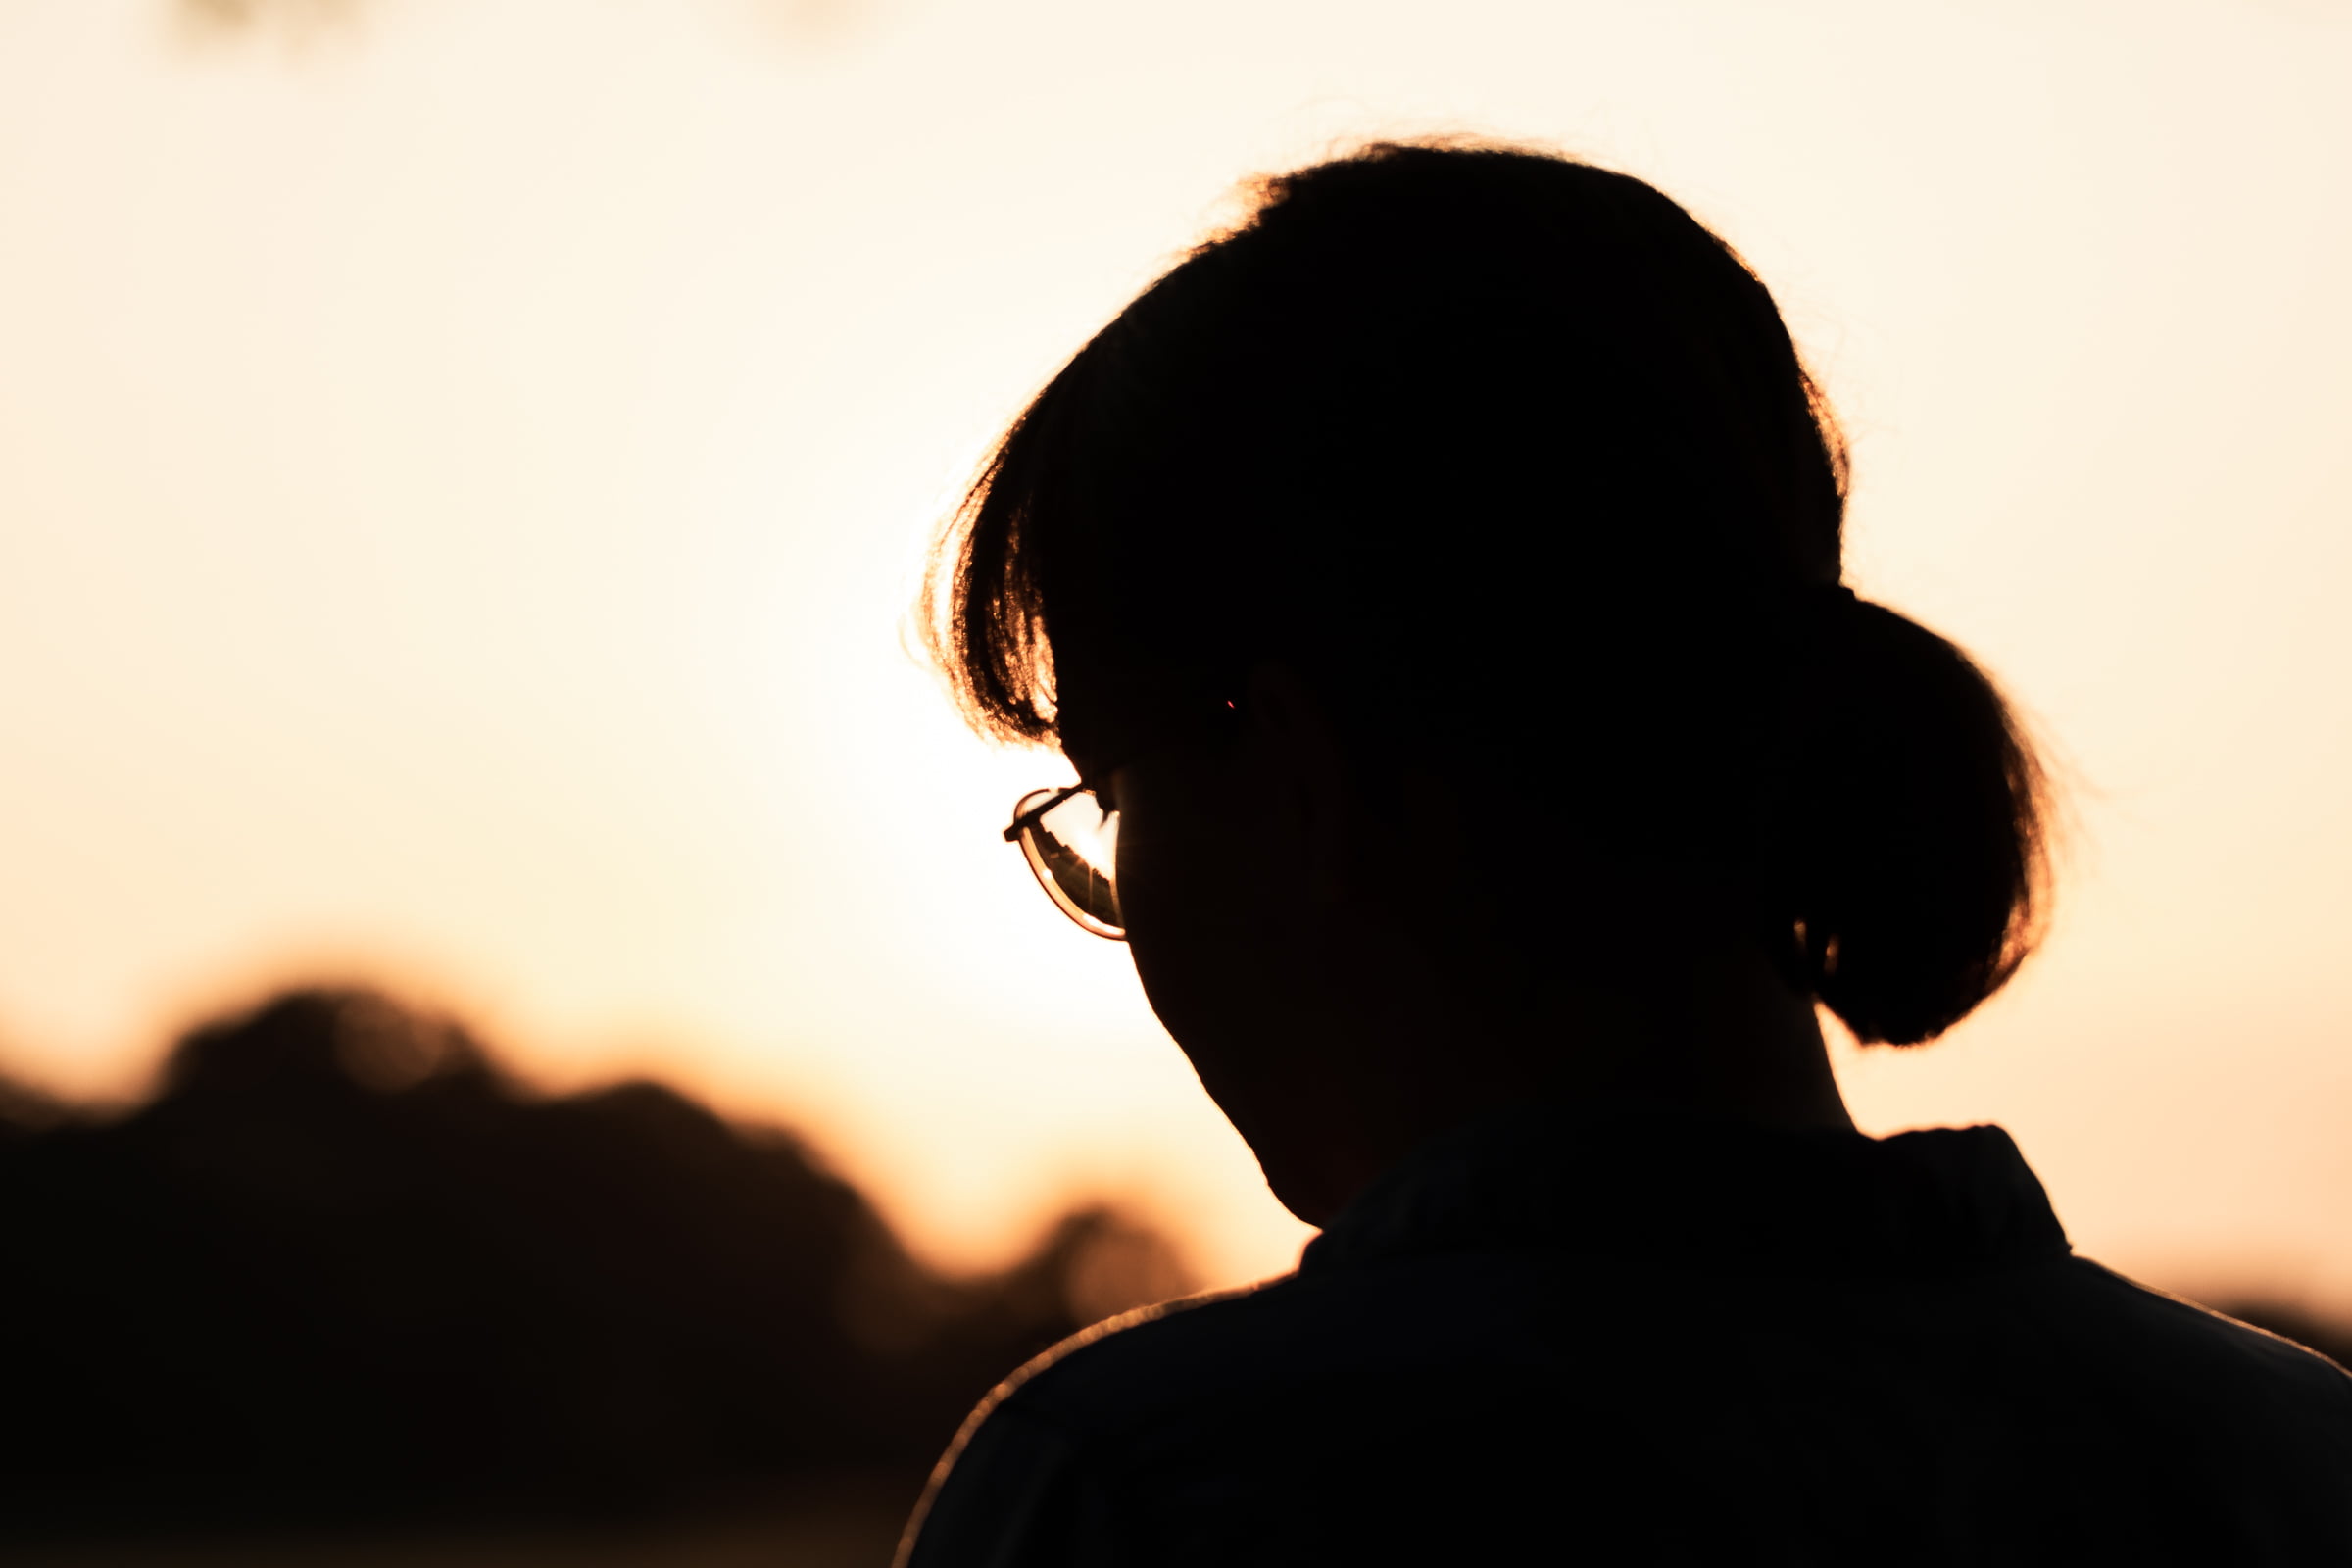 Silhouette of a woman's head against an orange sunset.